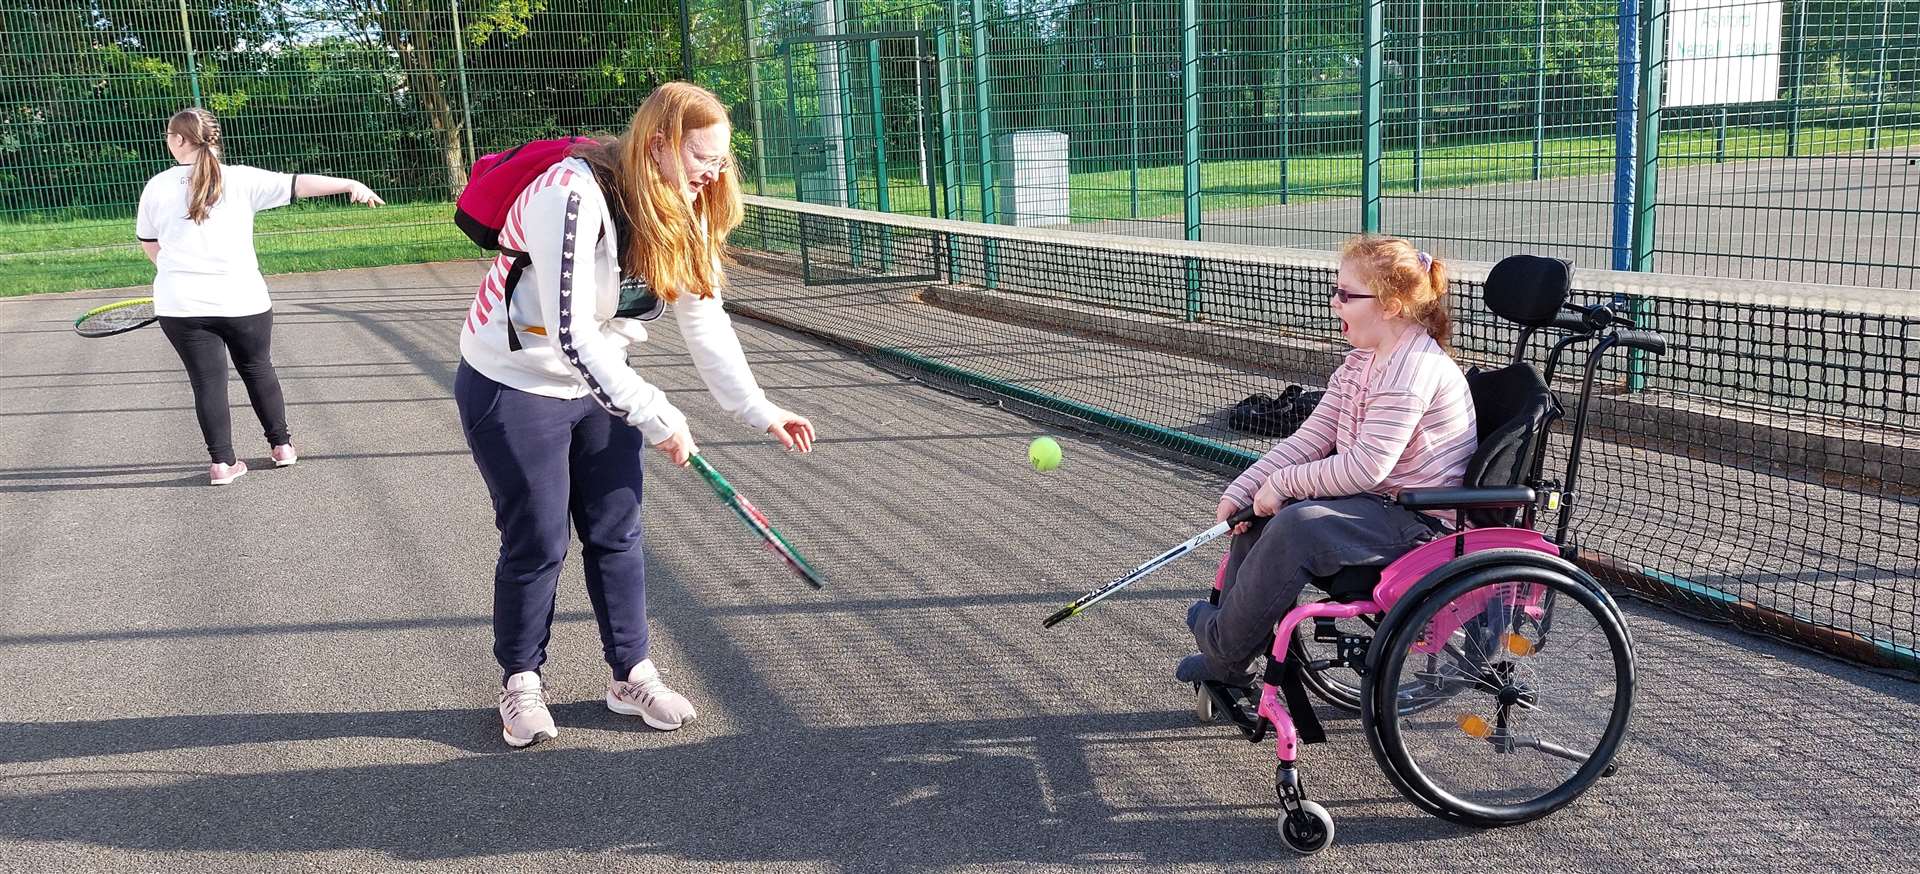 Amber playing tennis with her mum